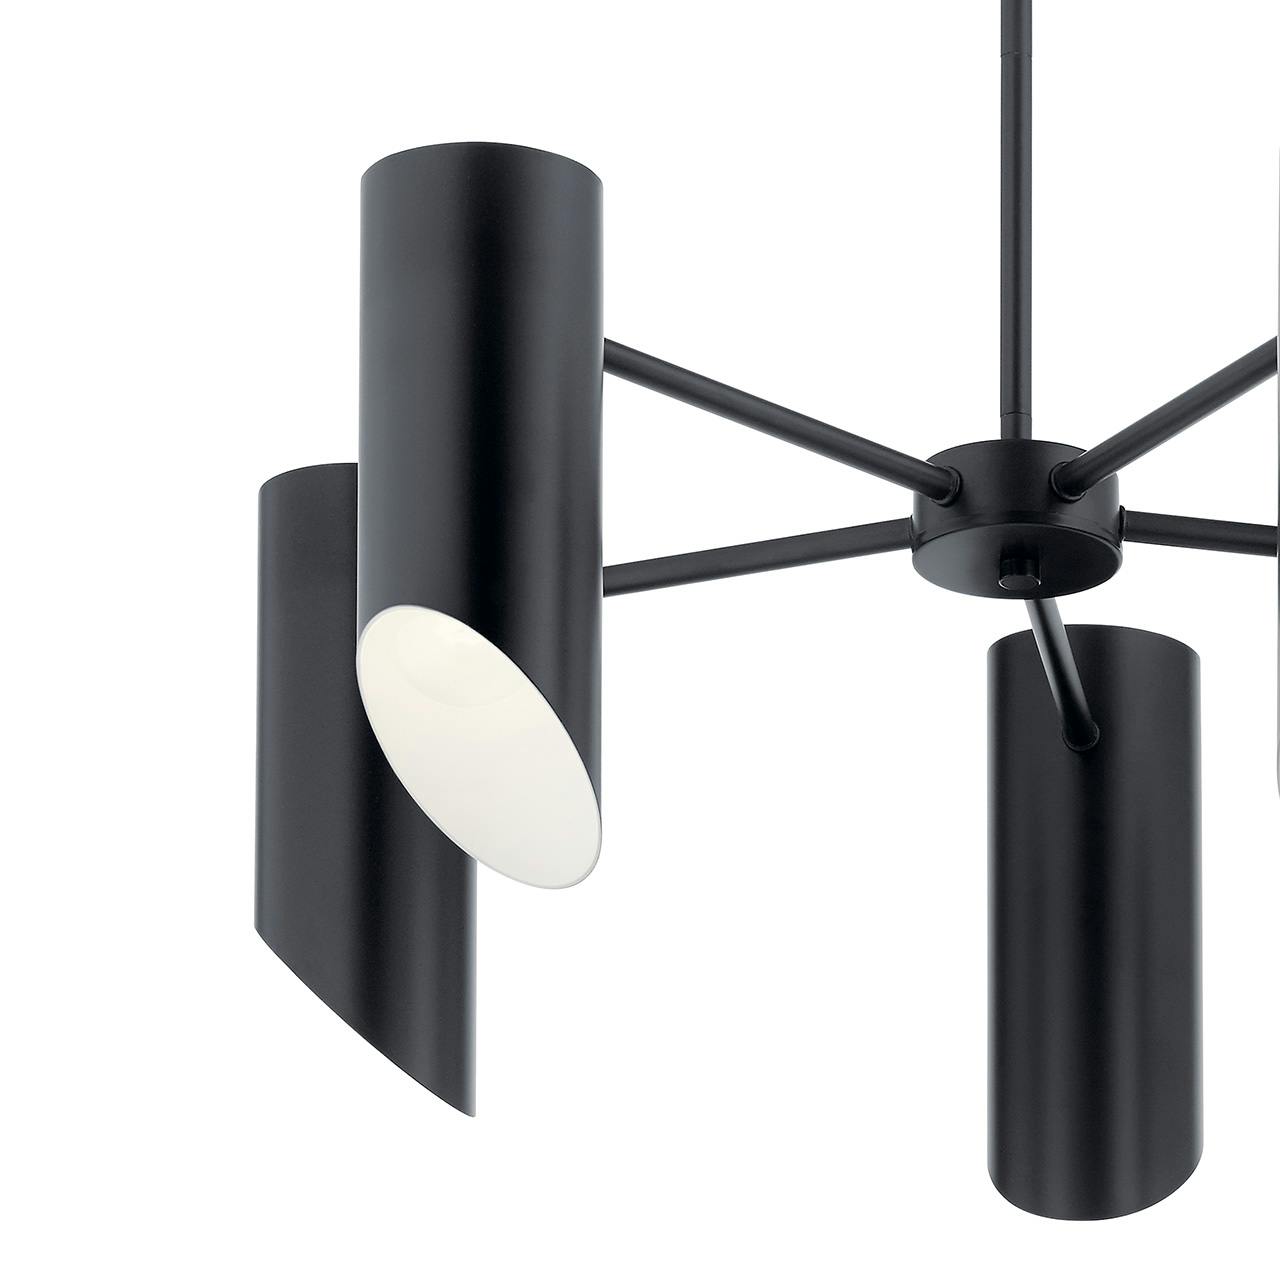 Close up view of the Trentino 5 Light Chandelier Black on a white background